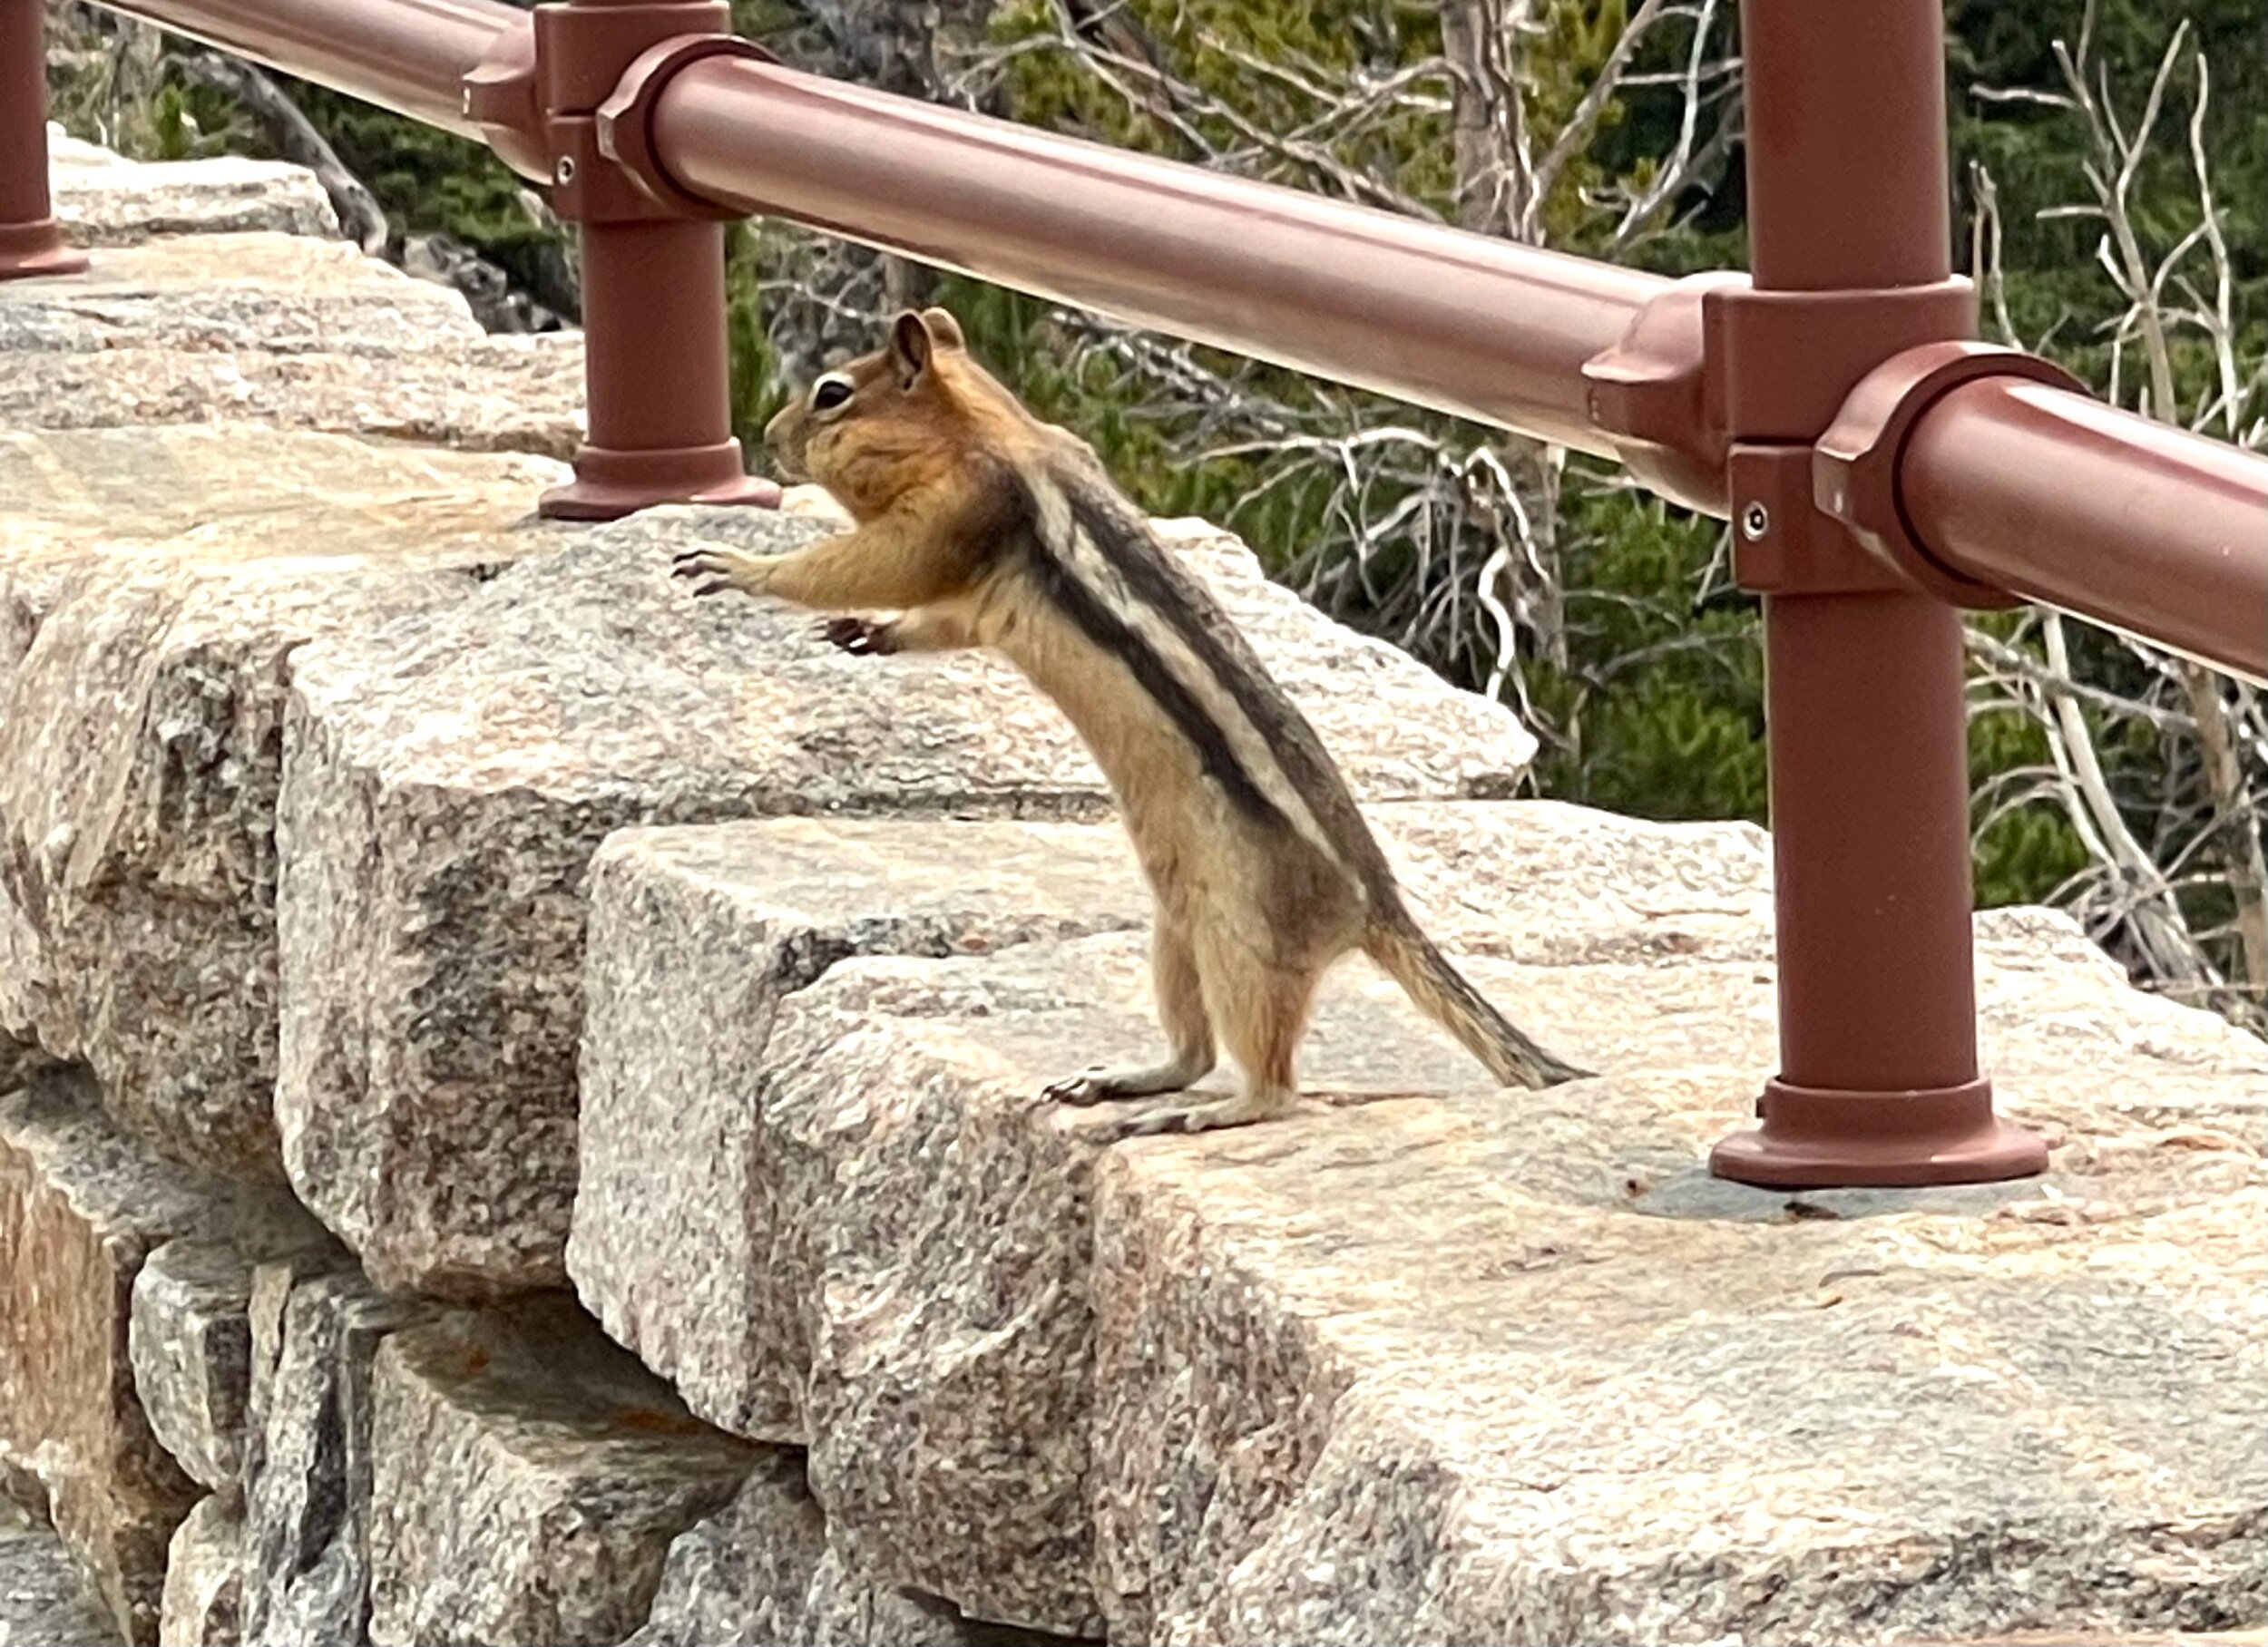  Chipmunks on the Beartooth are cashing in on tourism as well. They know every visitor at this prime overlook is a potential provider of some type of snack. Even with his jaws packed with sunflower seeds, he reaches for more treats. 